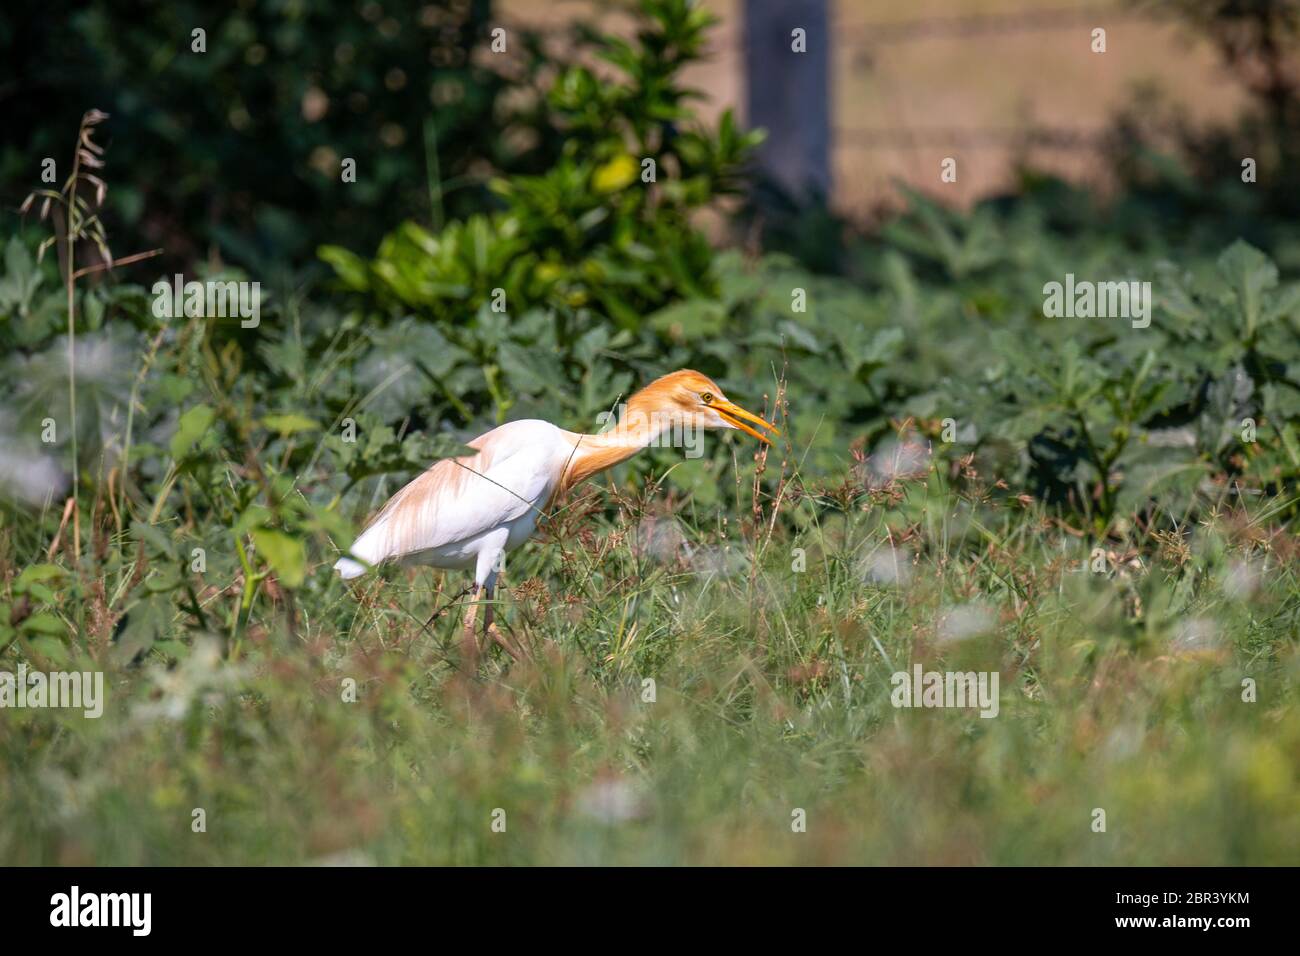 Closeup shot of  a Yellow Heron Bird known as Eastern cattle egret or Bubulcus Stock Photo